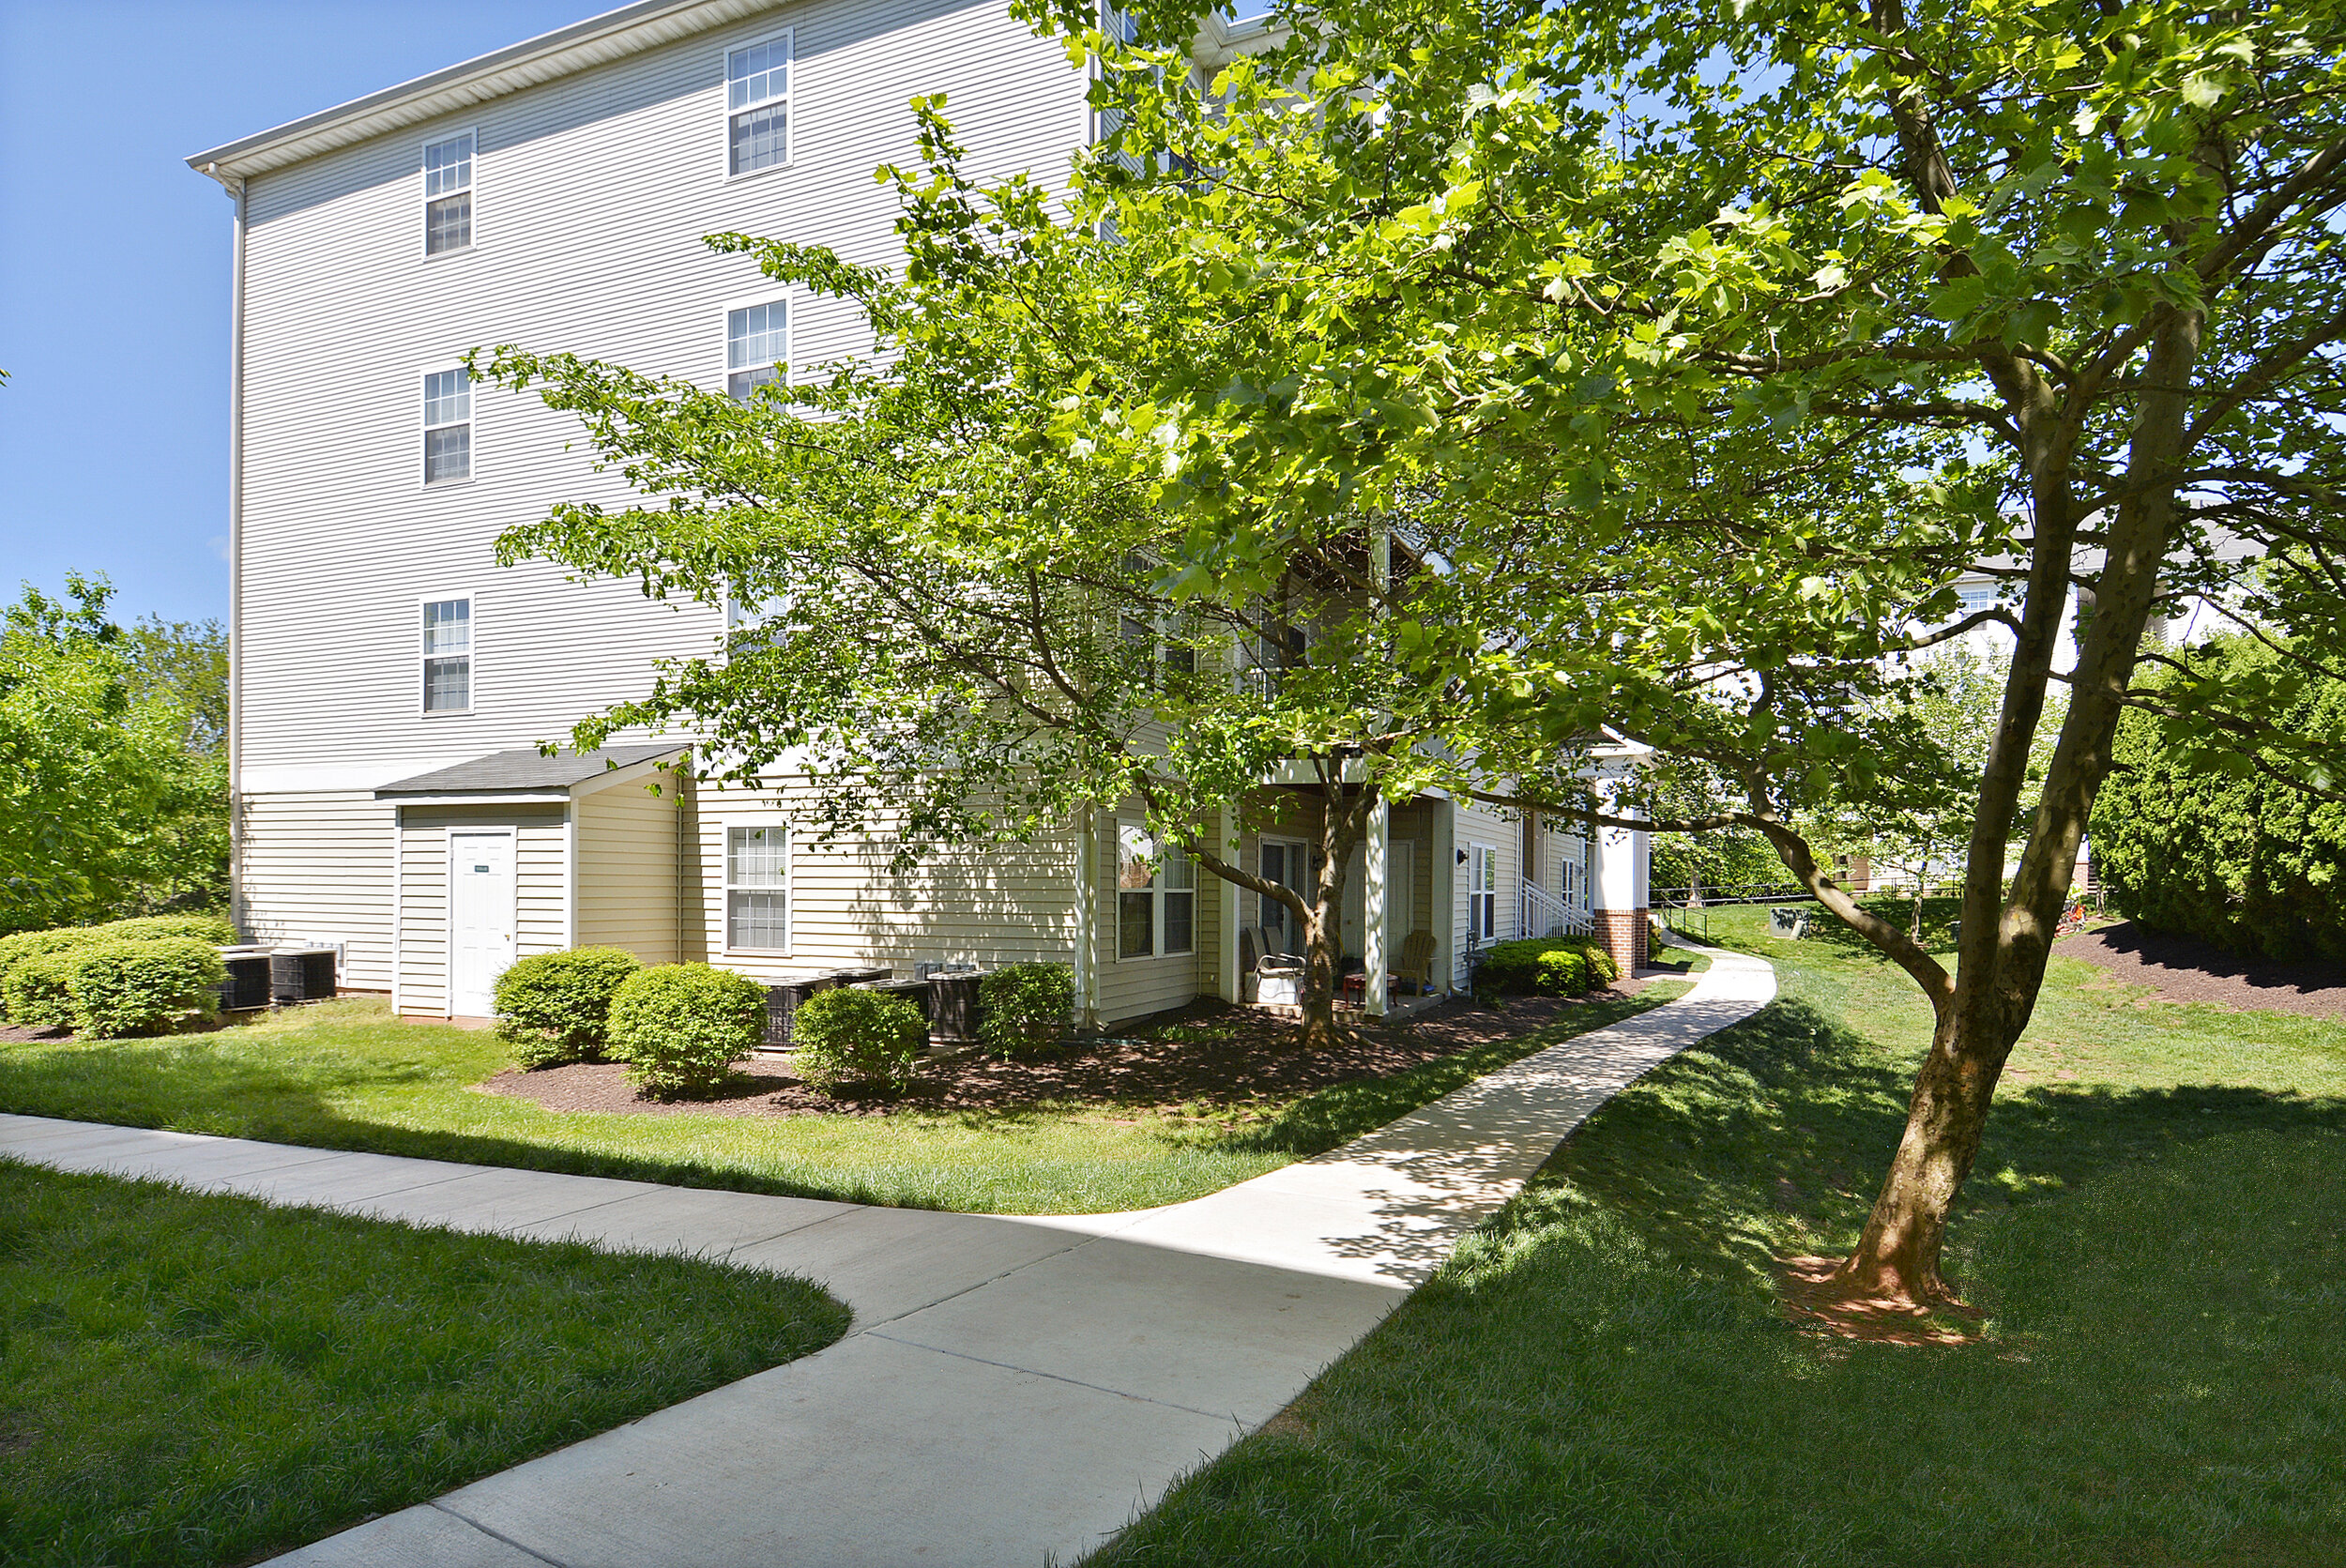  Ashburn Meadows is an affordable housing community with wide sidewalks in Northern Virginia. 